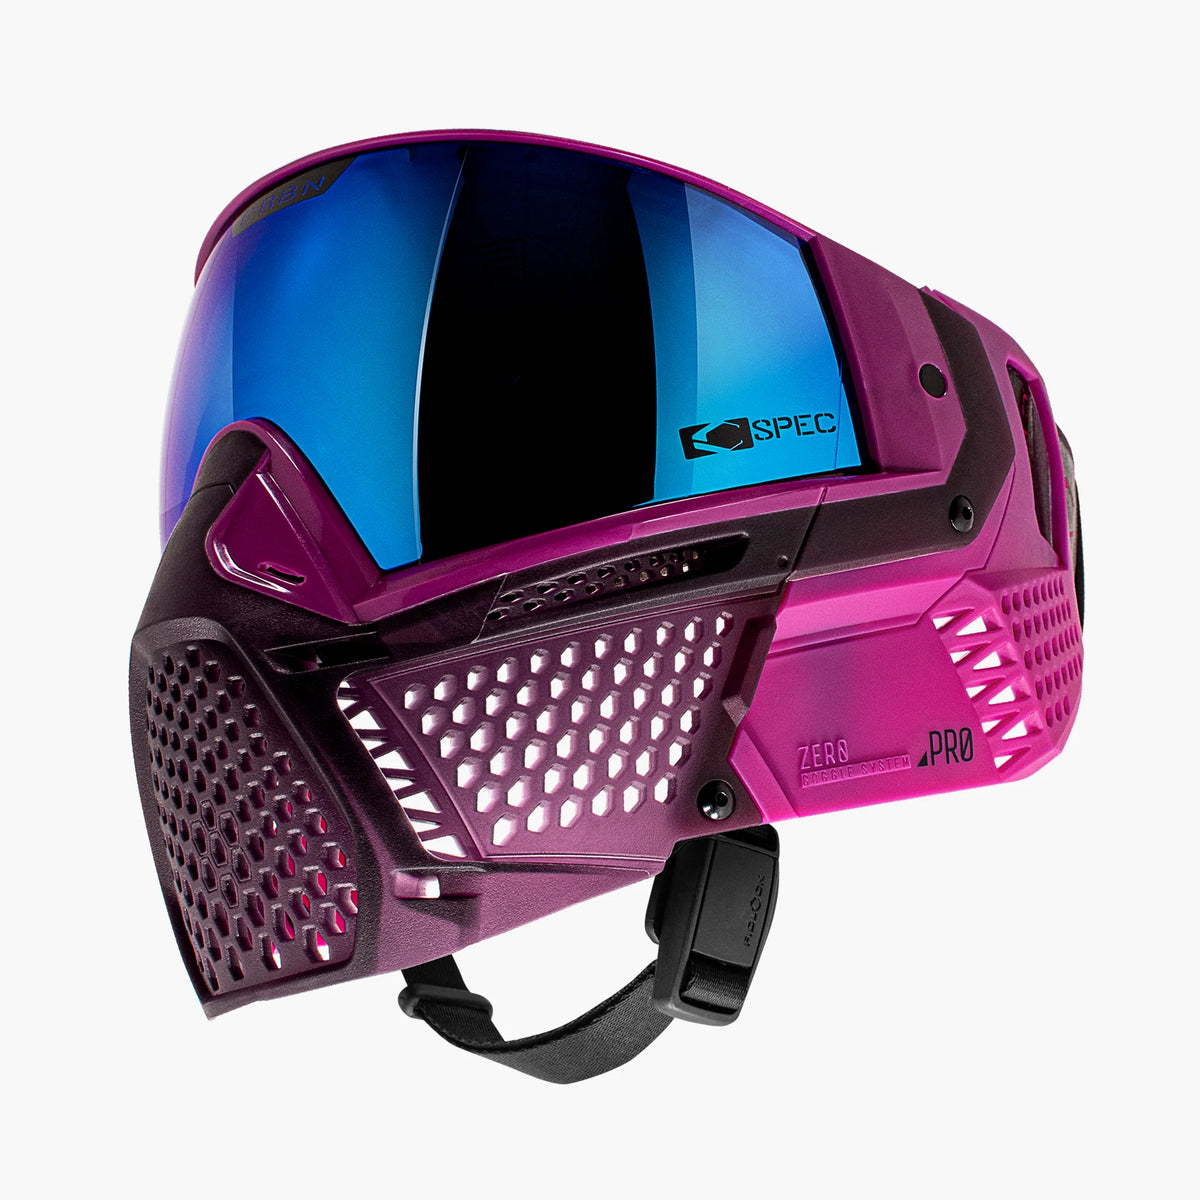 CRBN pro violet - Less/More coverage - Paintball Goggles